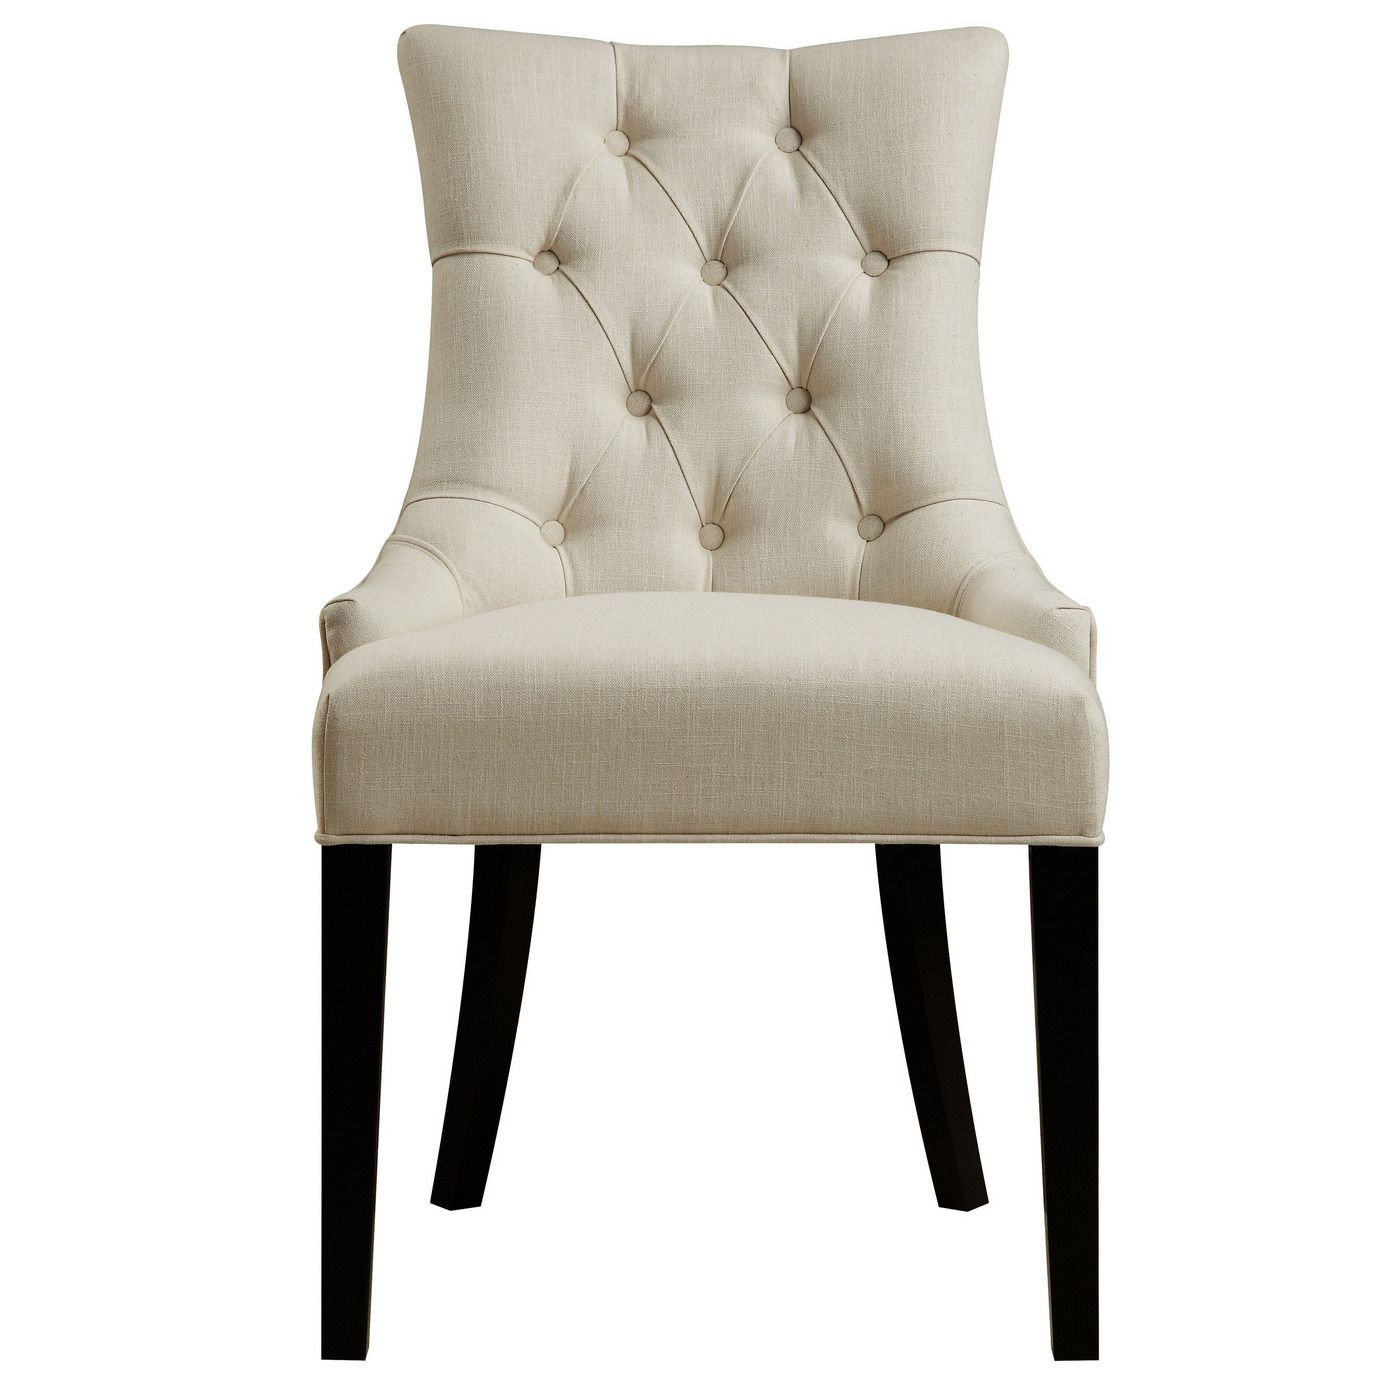 Portia Ivory Linen Button Tufted Dining Chair W/ Espresso Tapered Legs Regarding Ivory Button Tufted Vanity Stools (View 15 of 20)